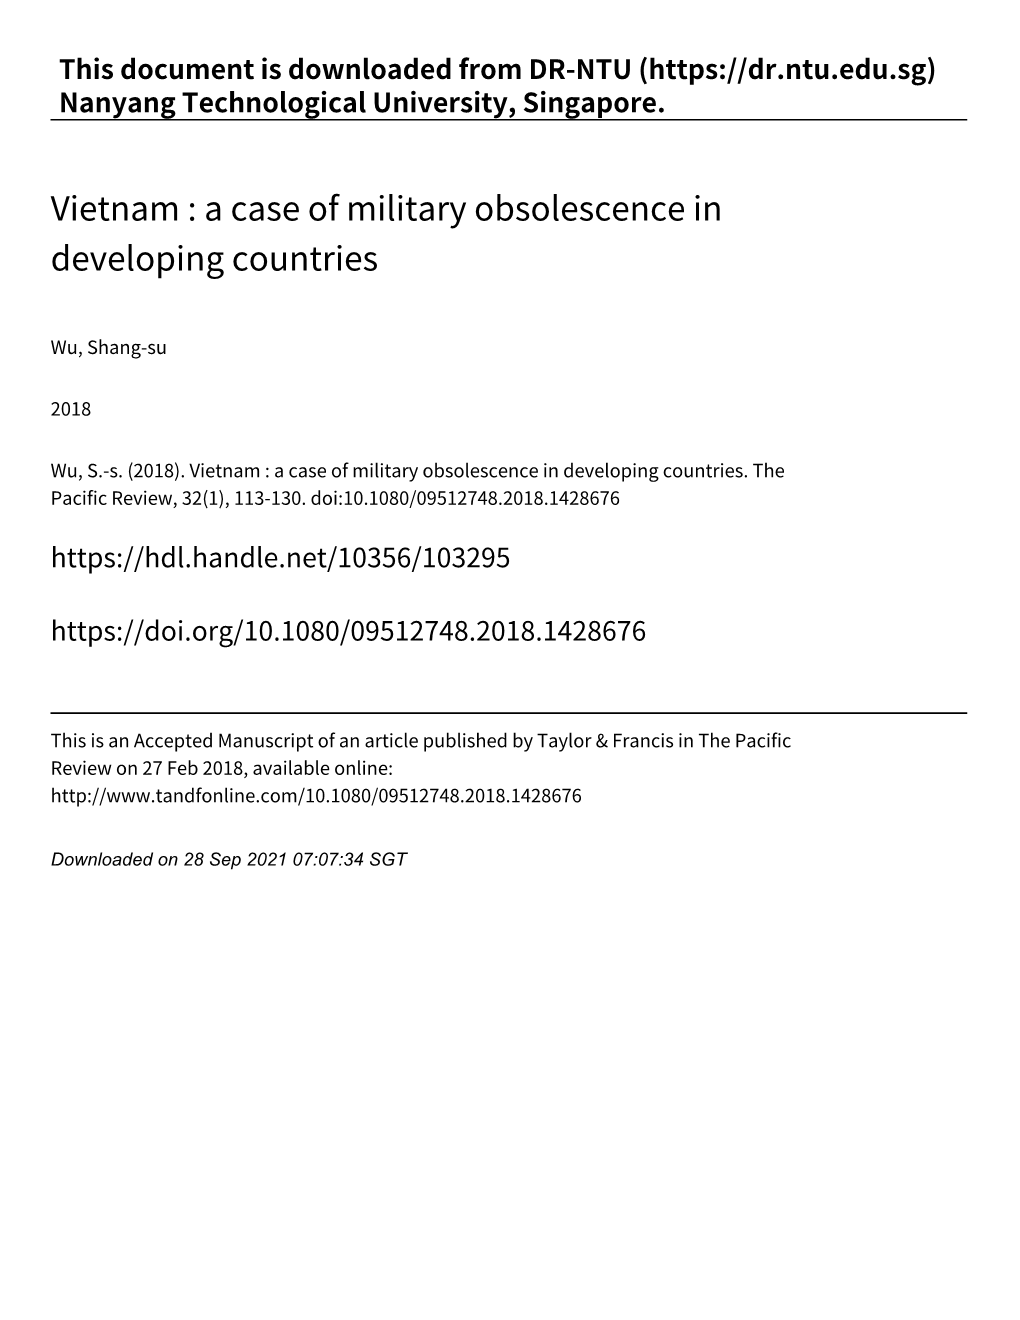 Vietnam : a Case of Military Obsolescence in Developing Countries